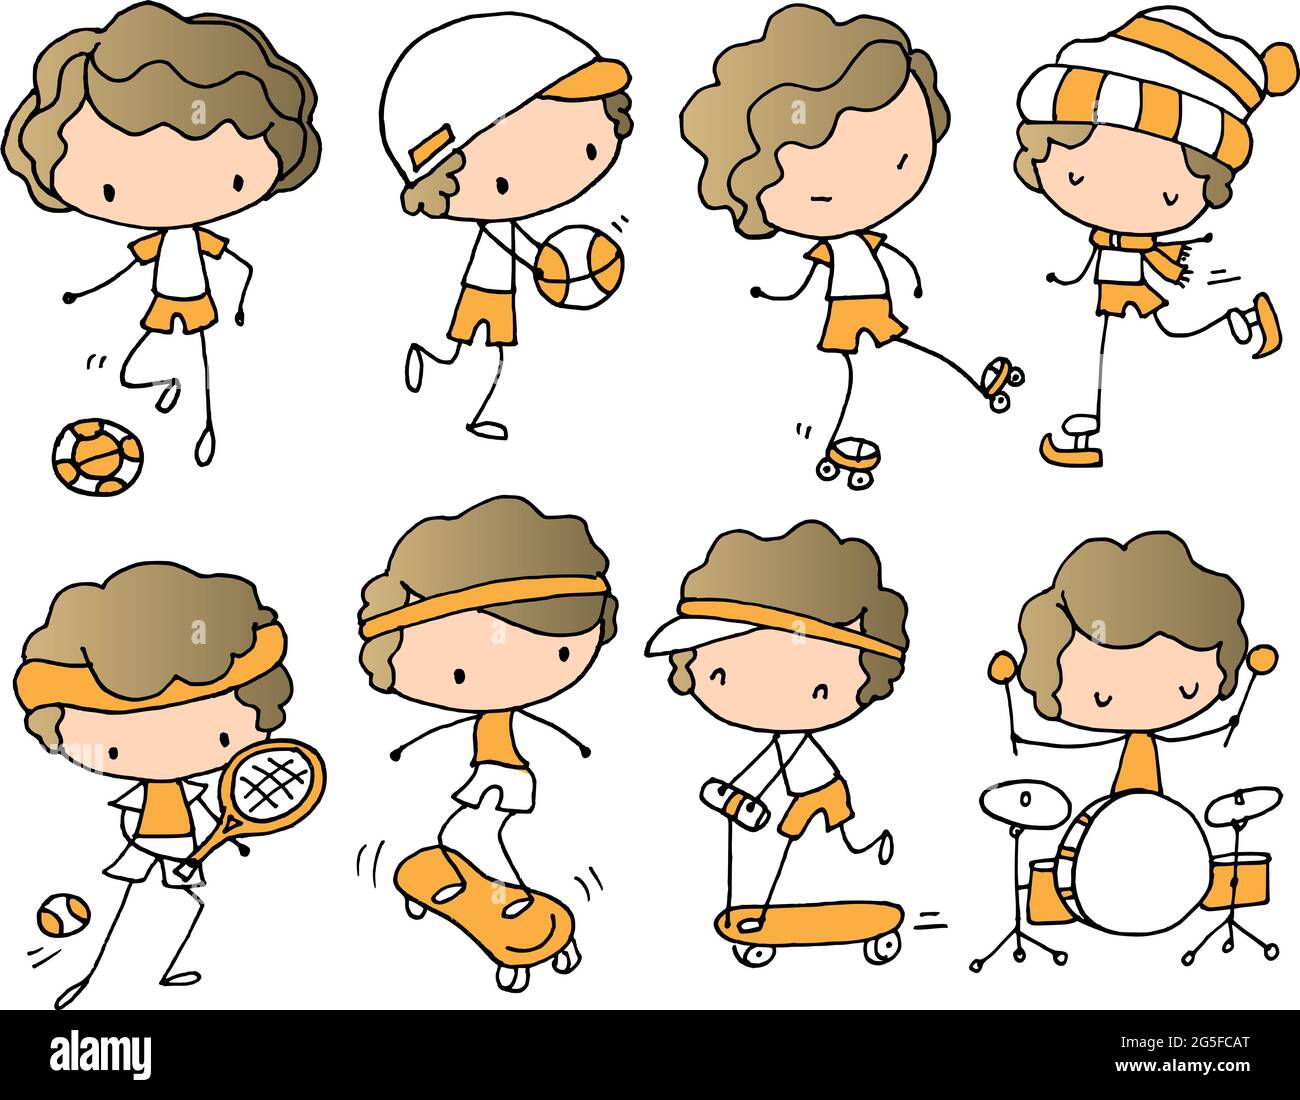 Vector illustration cartoon boy playing musical instruments, pulley, tennis, basketball, football, skating, scooter series border frame card background Stock Photo